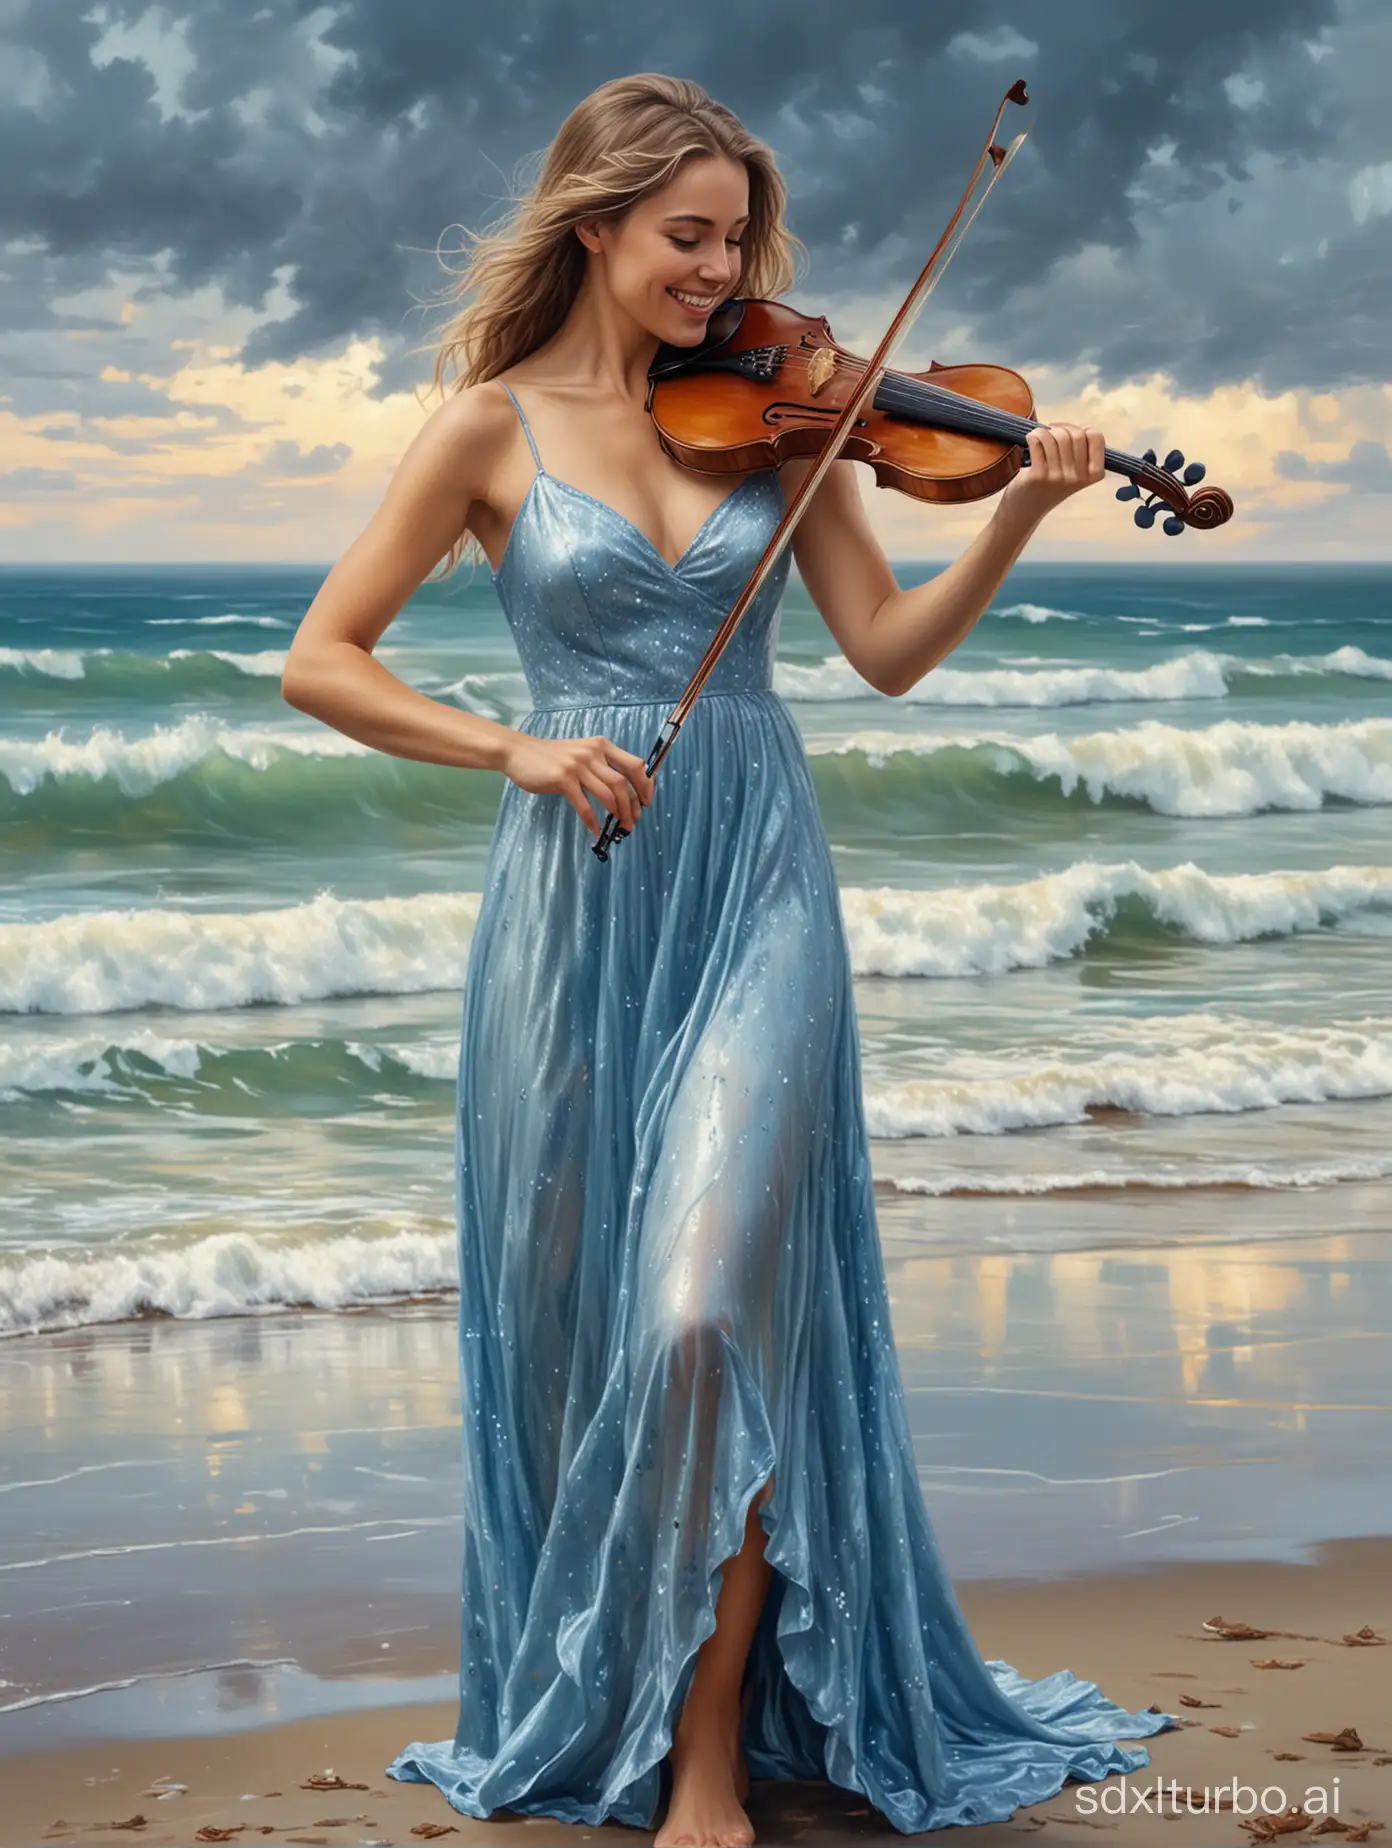 Caucasian-Woman-in-Shimmery-Blue-Dress-Playing-Violin-on-Cloudy-Beach